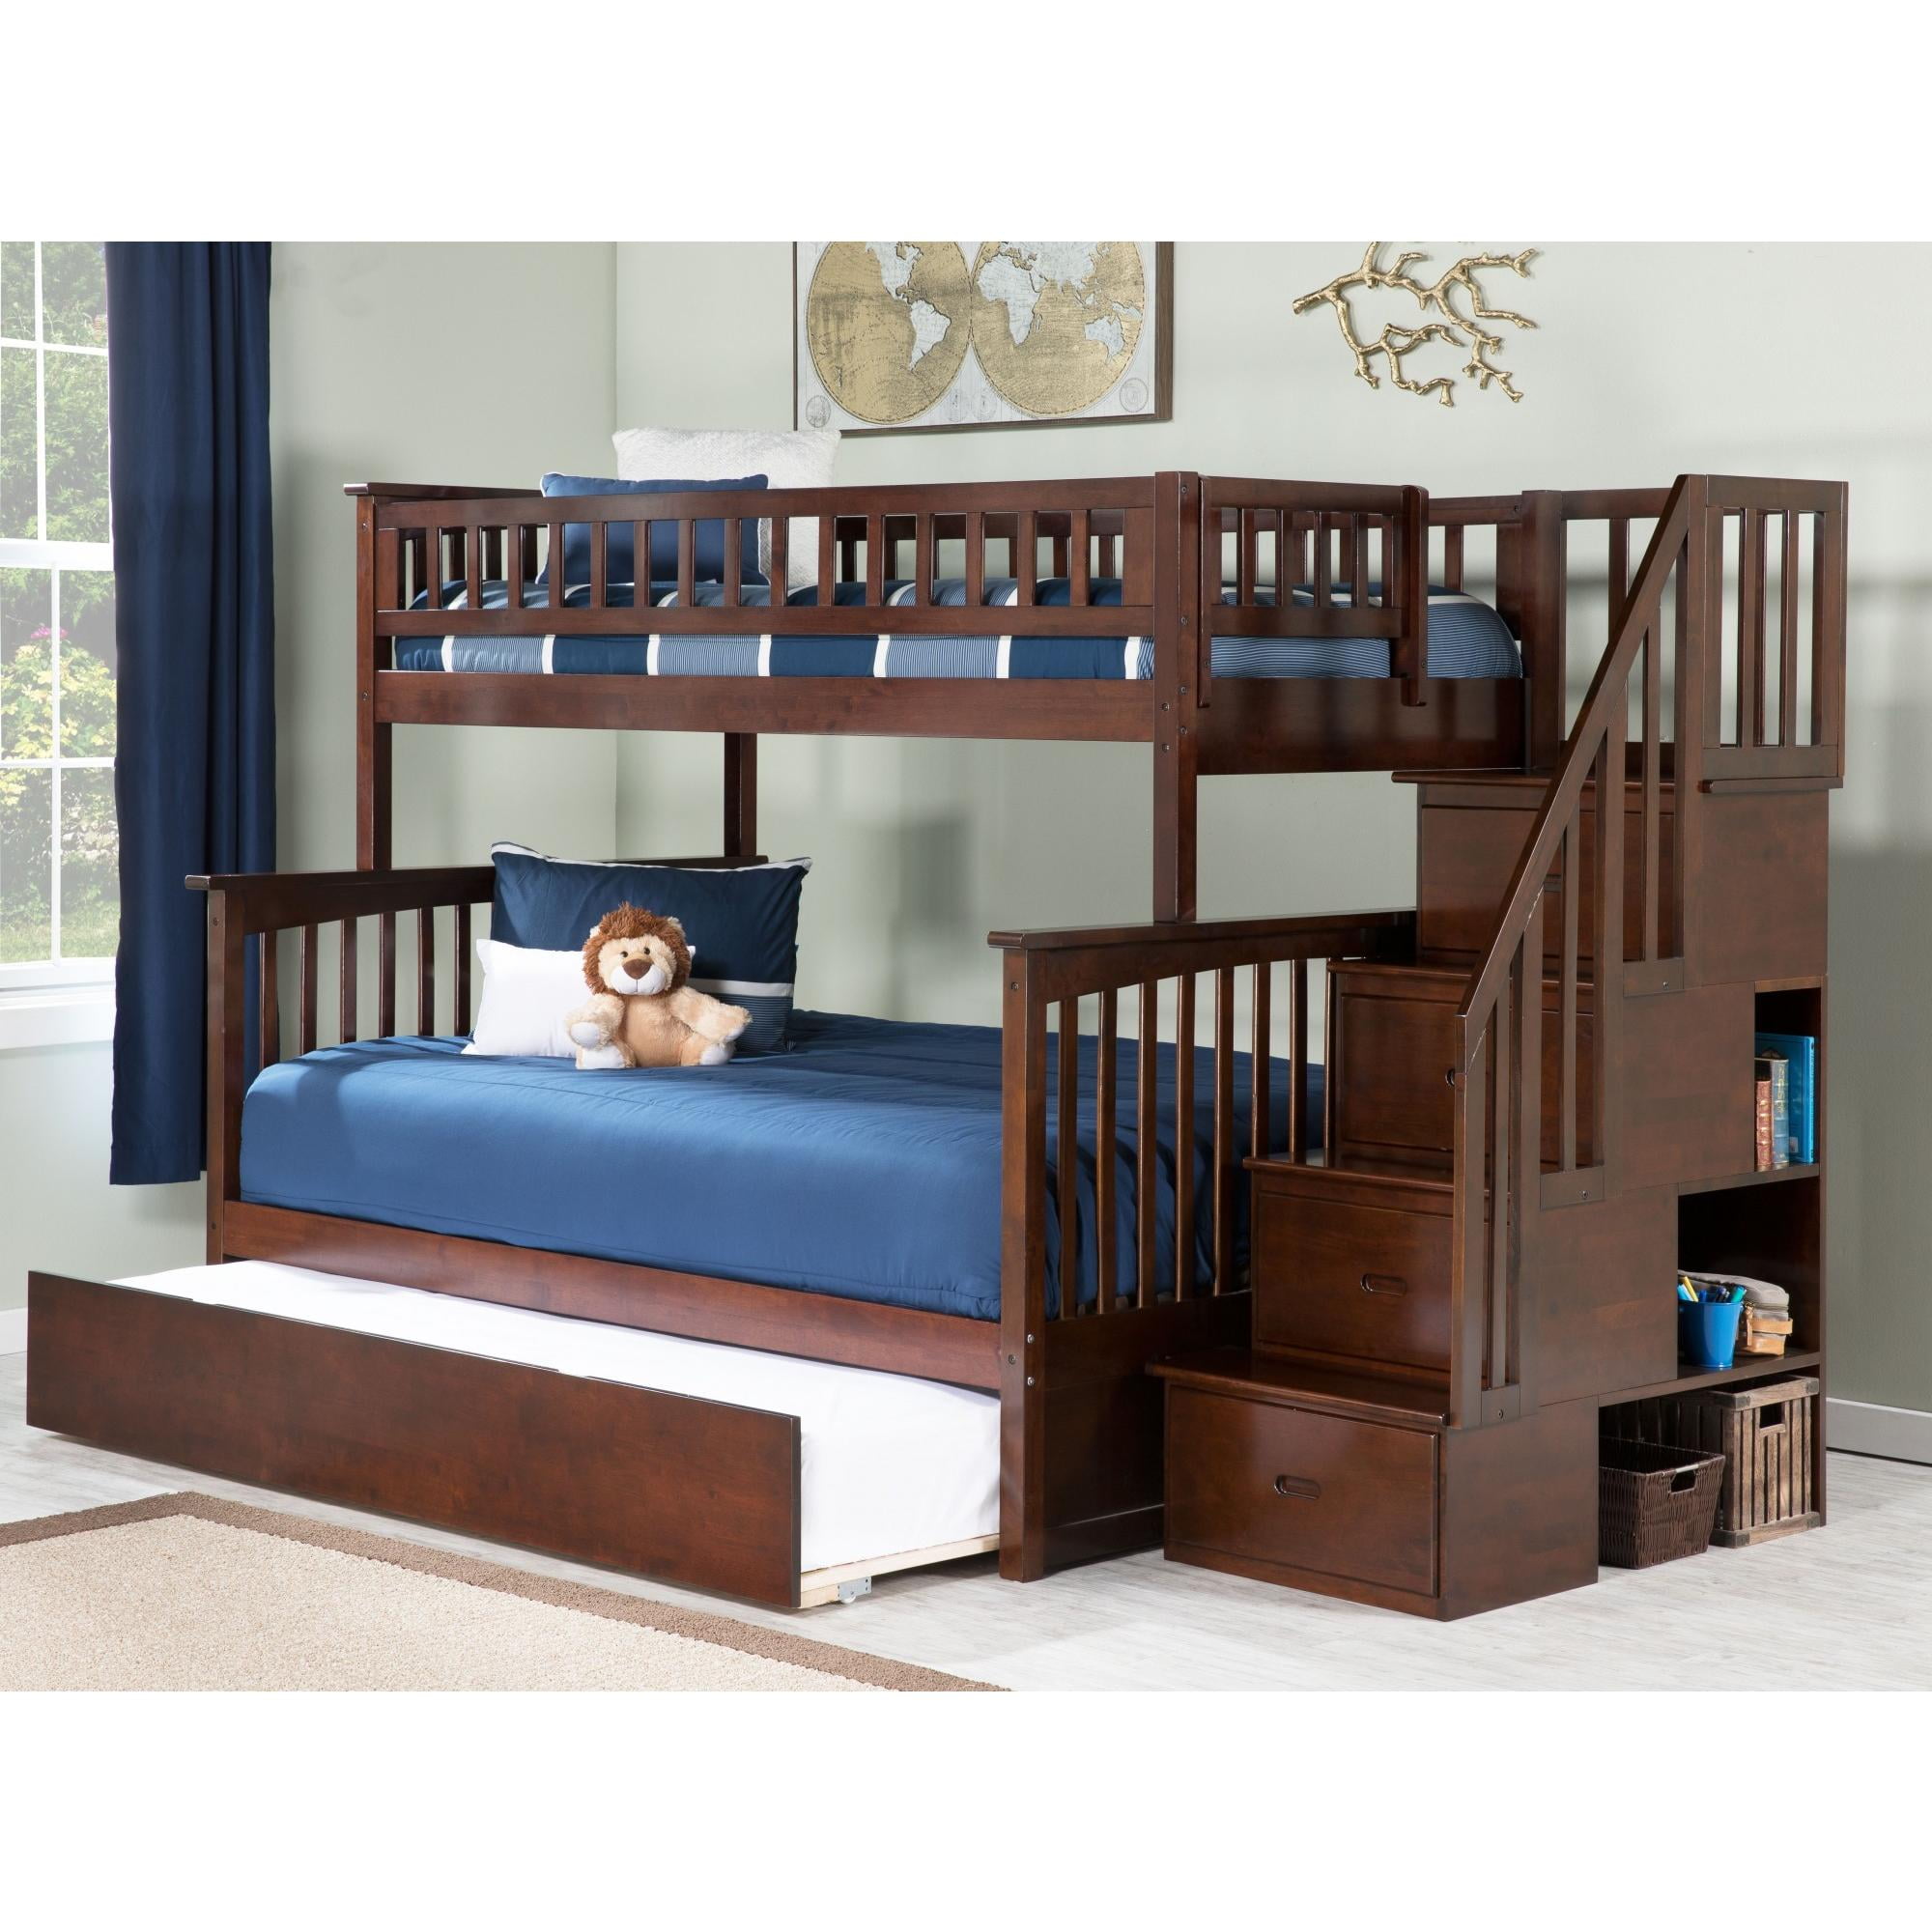 Columbia Staircase Bunk Bed Twin Over, Stairway Twin Over Full Bunk Bed With Trundle